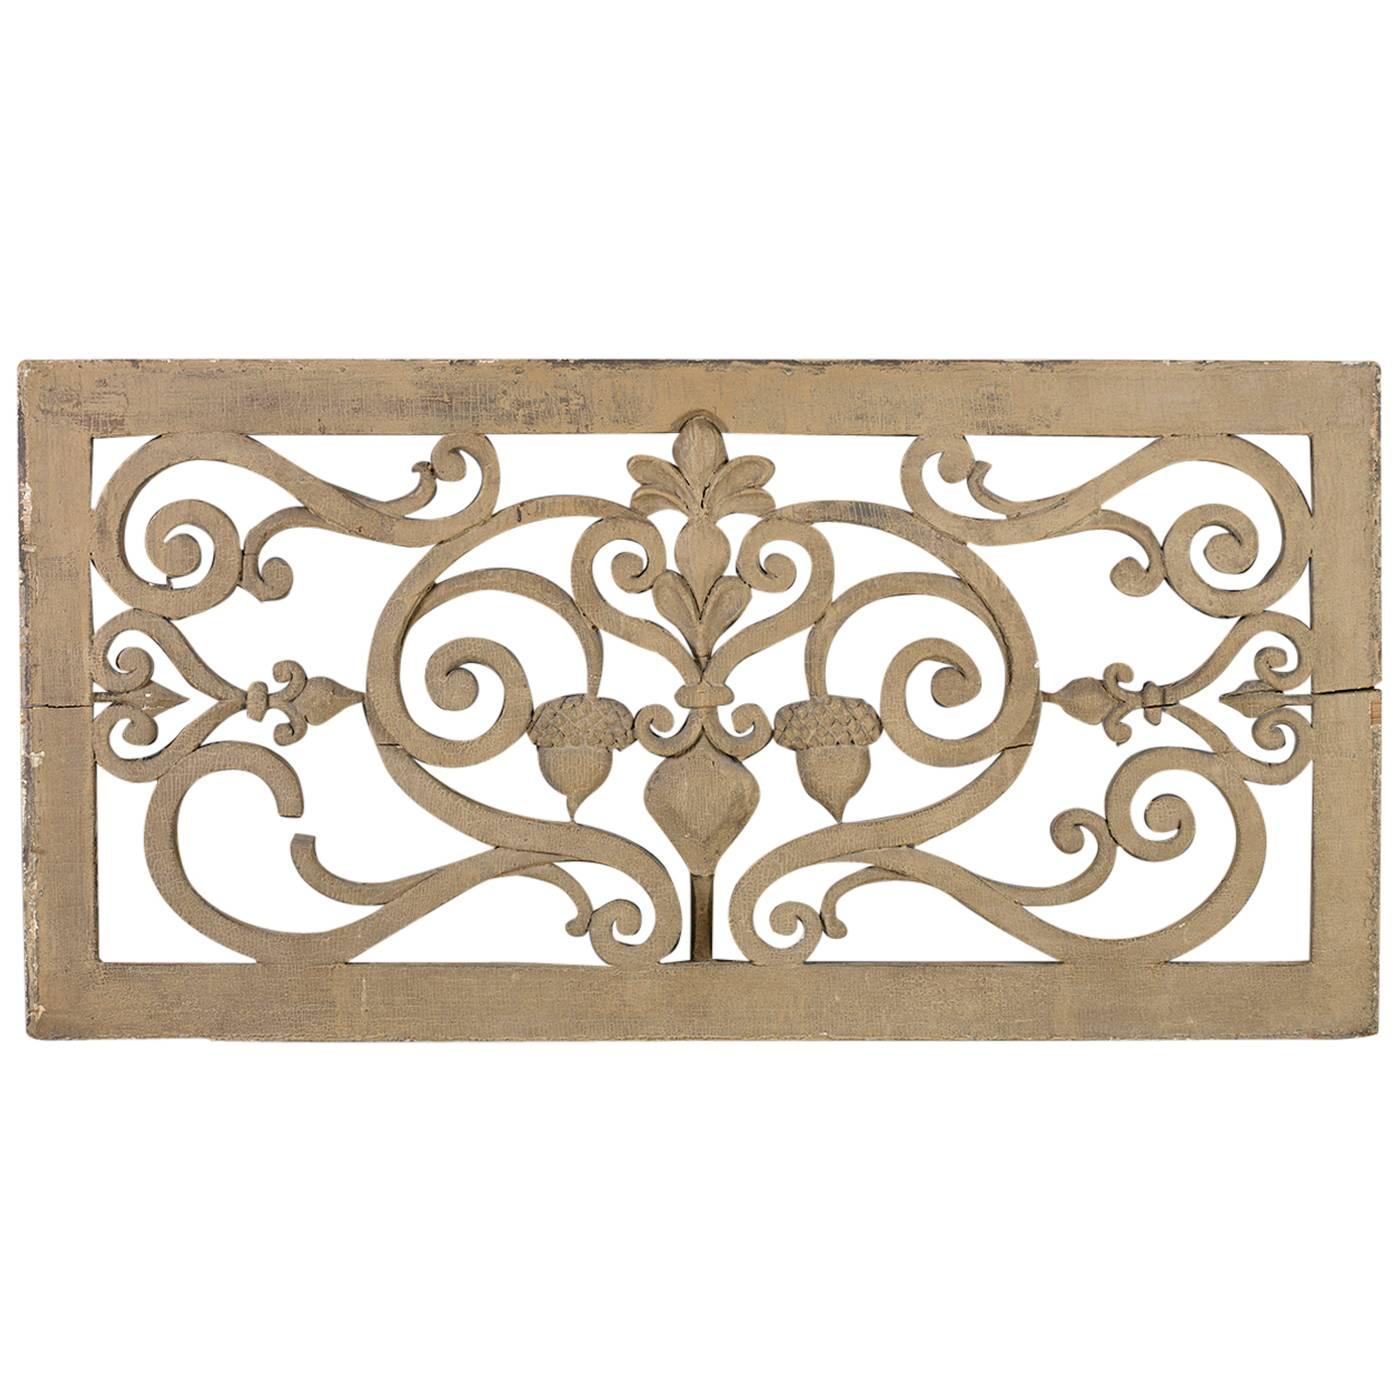 Carved Architectural Element For Sale